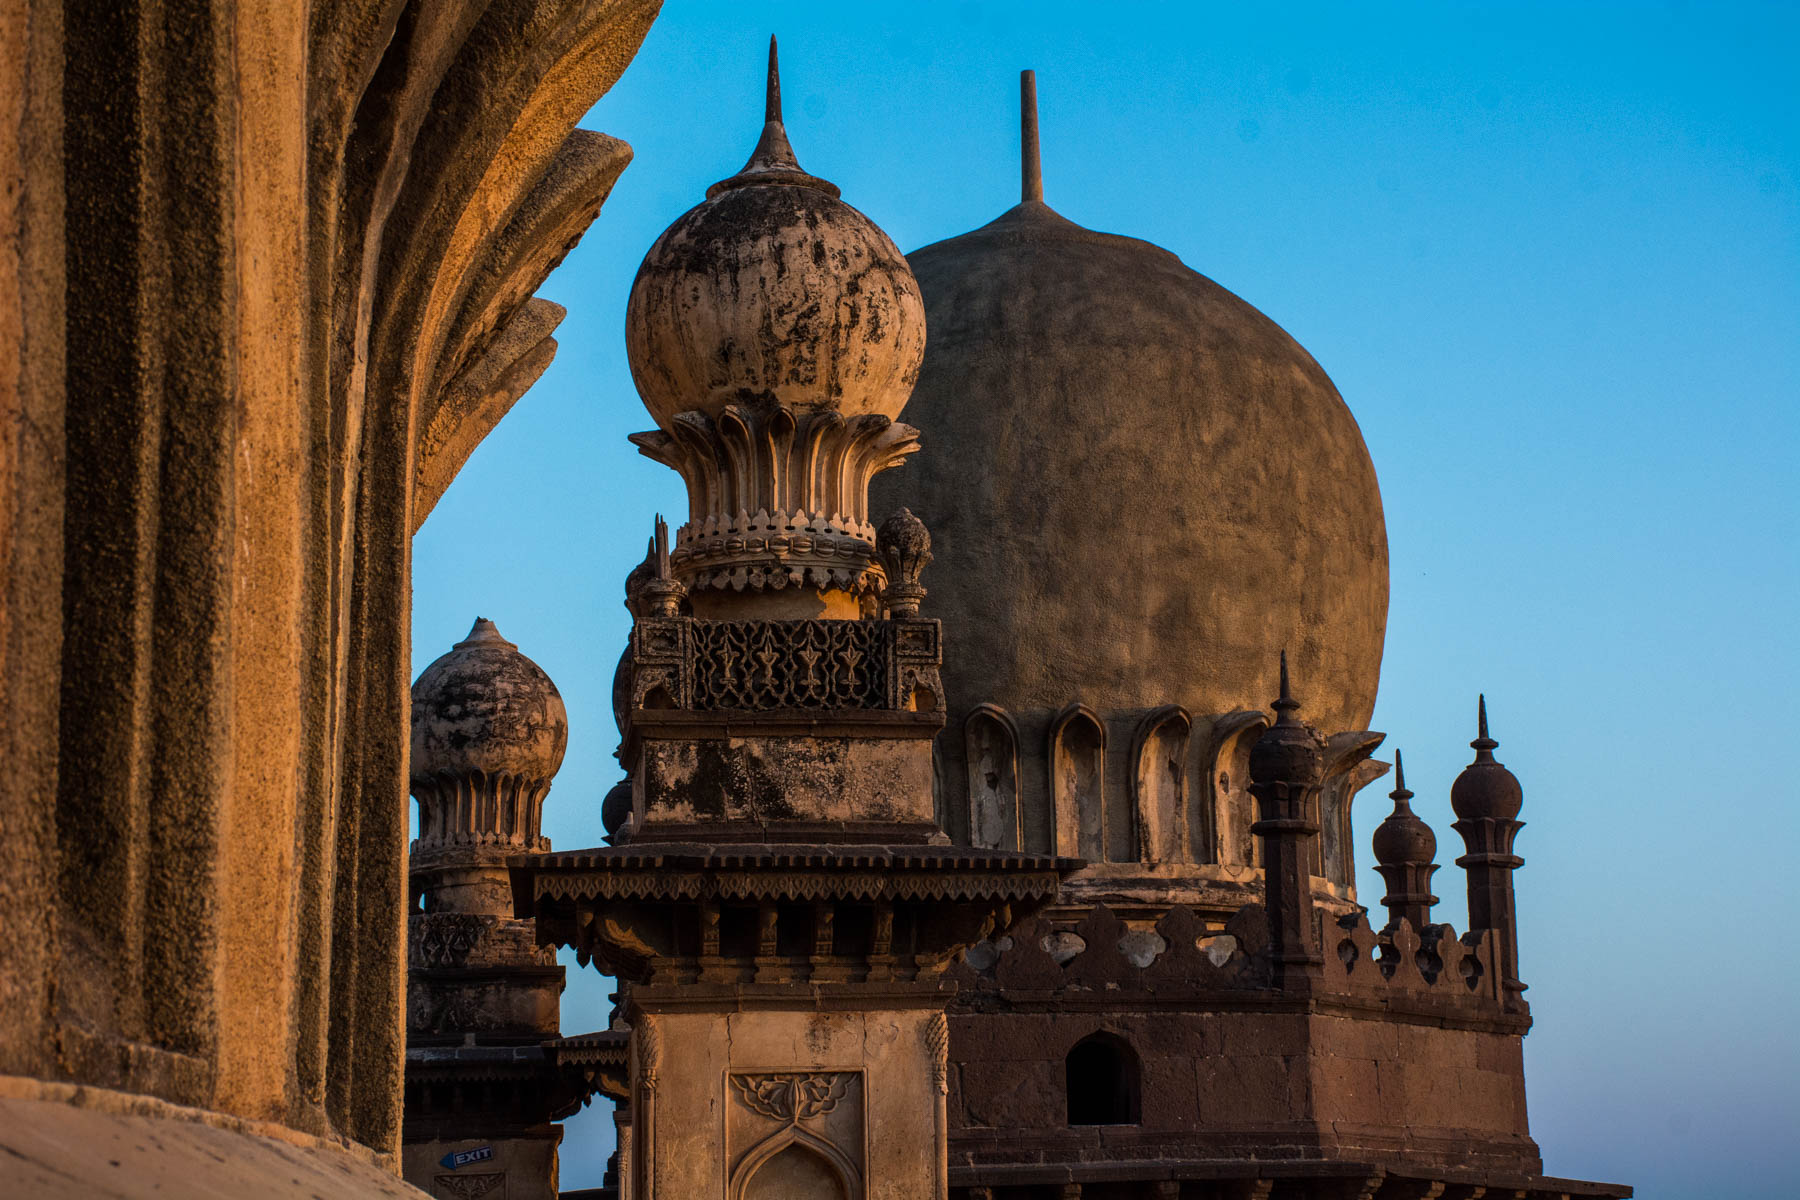 Off the beaten track places to visit in Karnatka, India - the domes of Gol Gumbaz at sunrise in Bijapur, India - Lost With Purpose